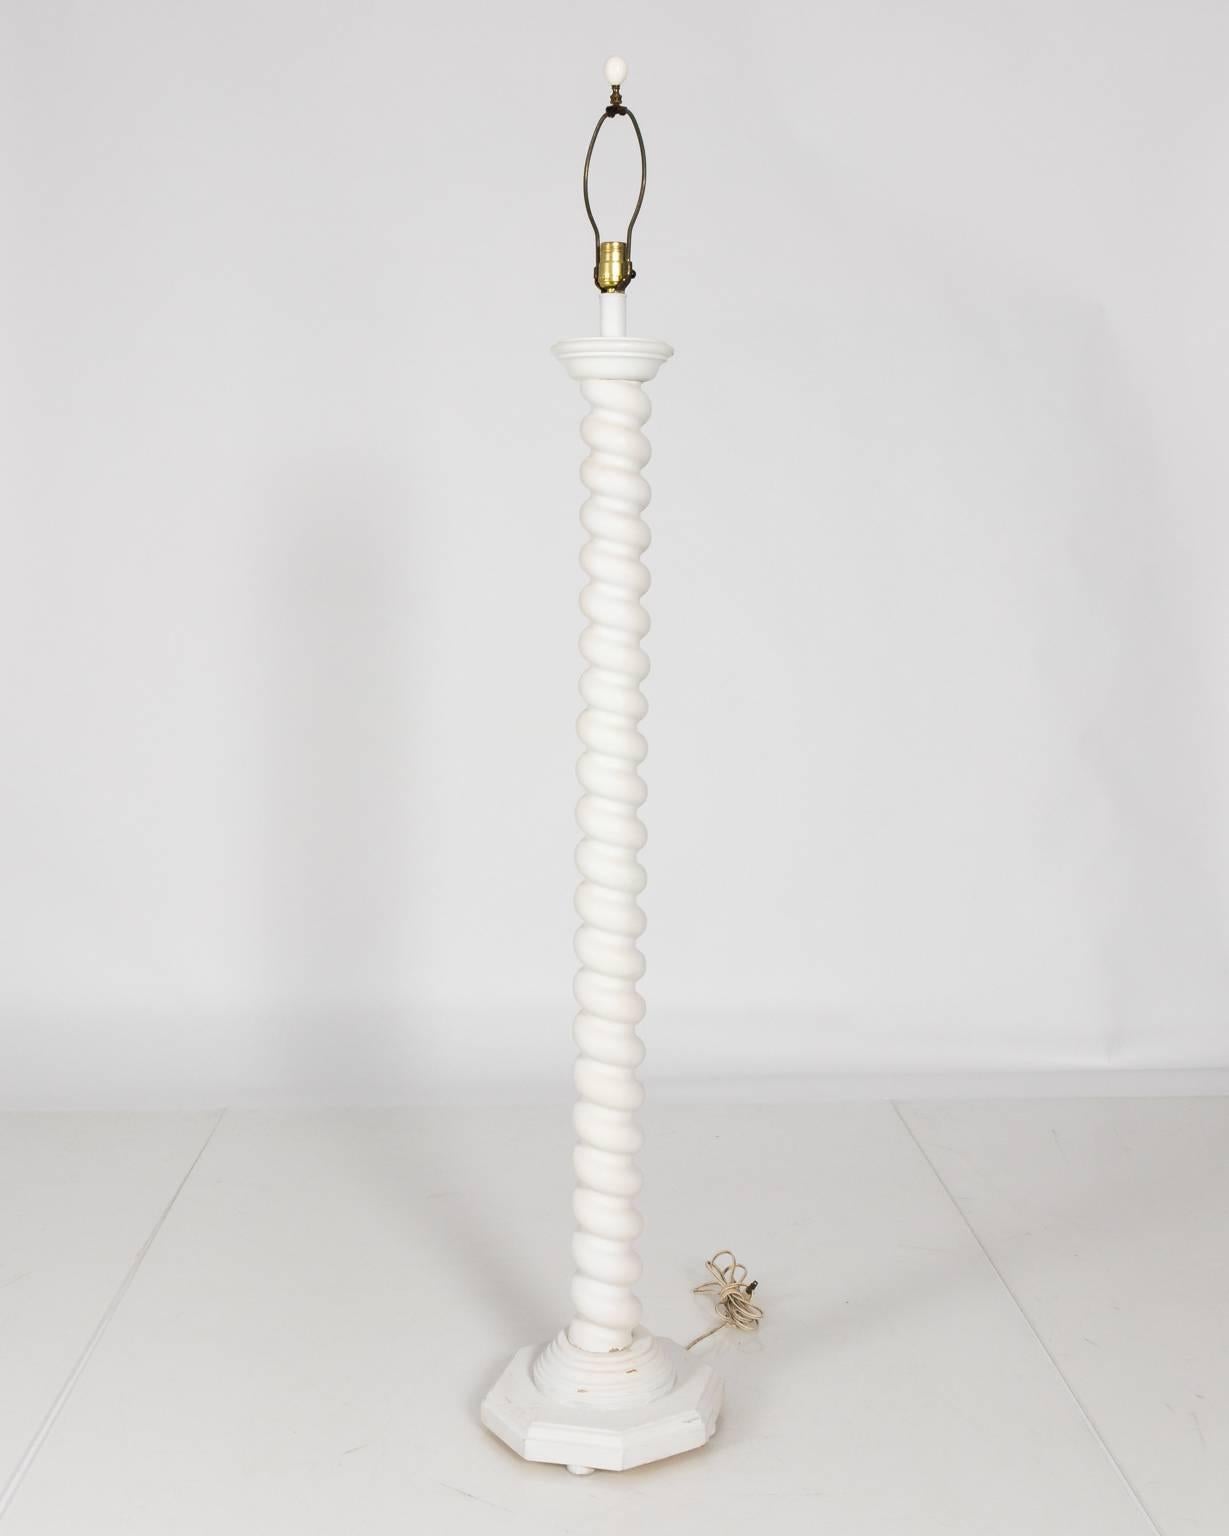 White Painted Barley Twist Floor Lamp In Good Condition For Sale In Stamford, CT